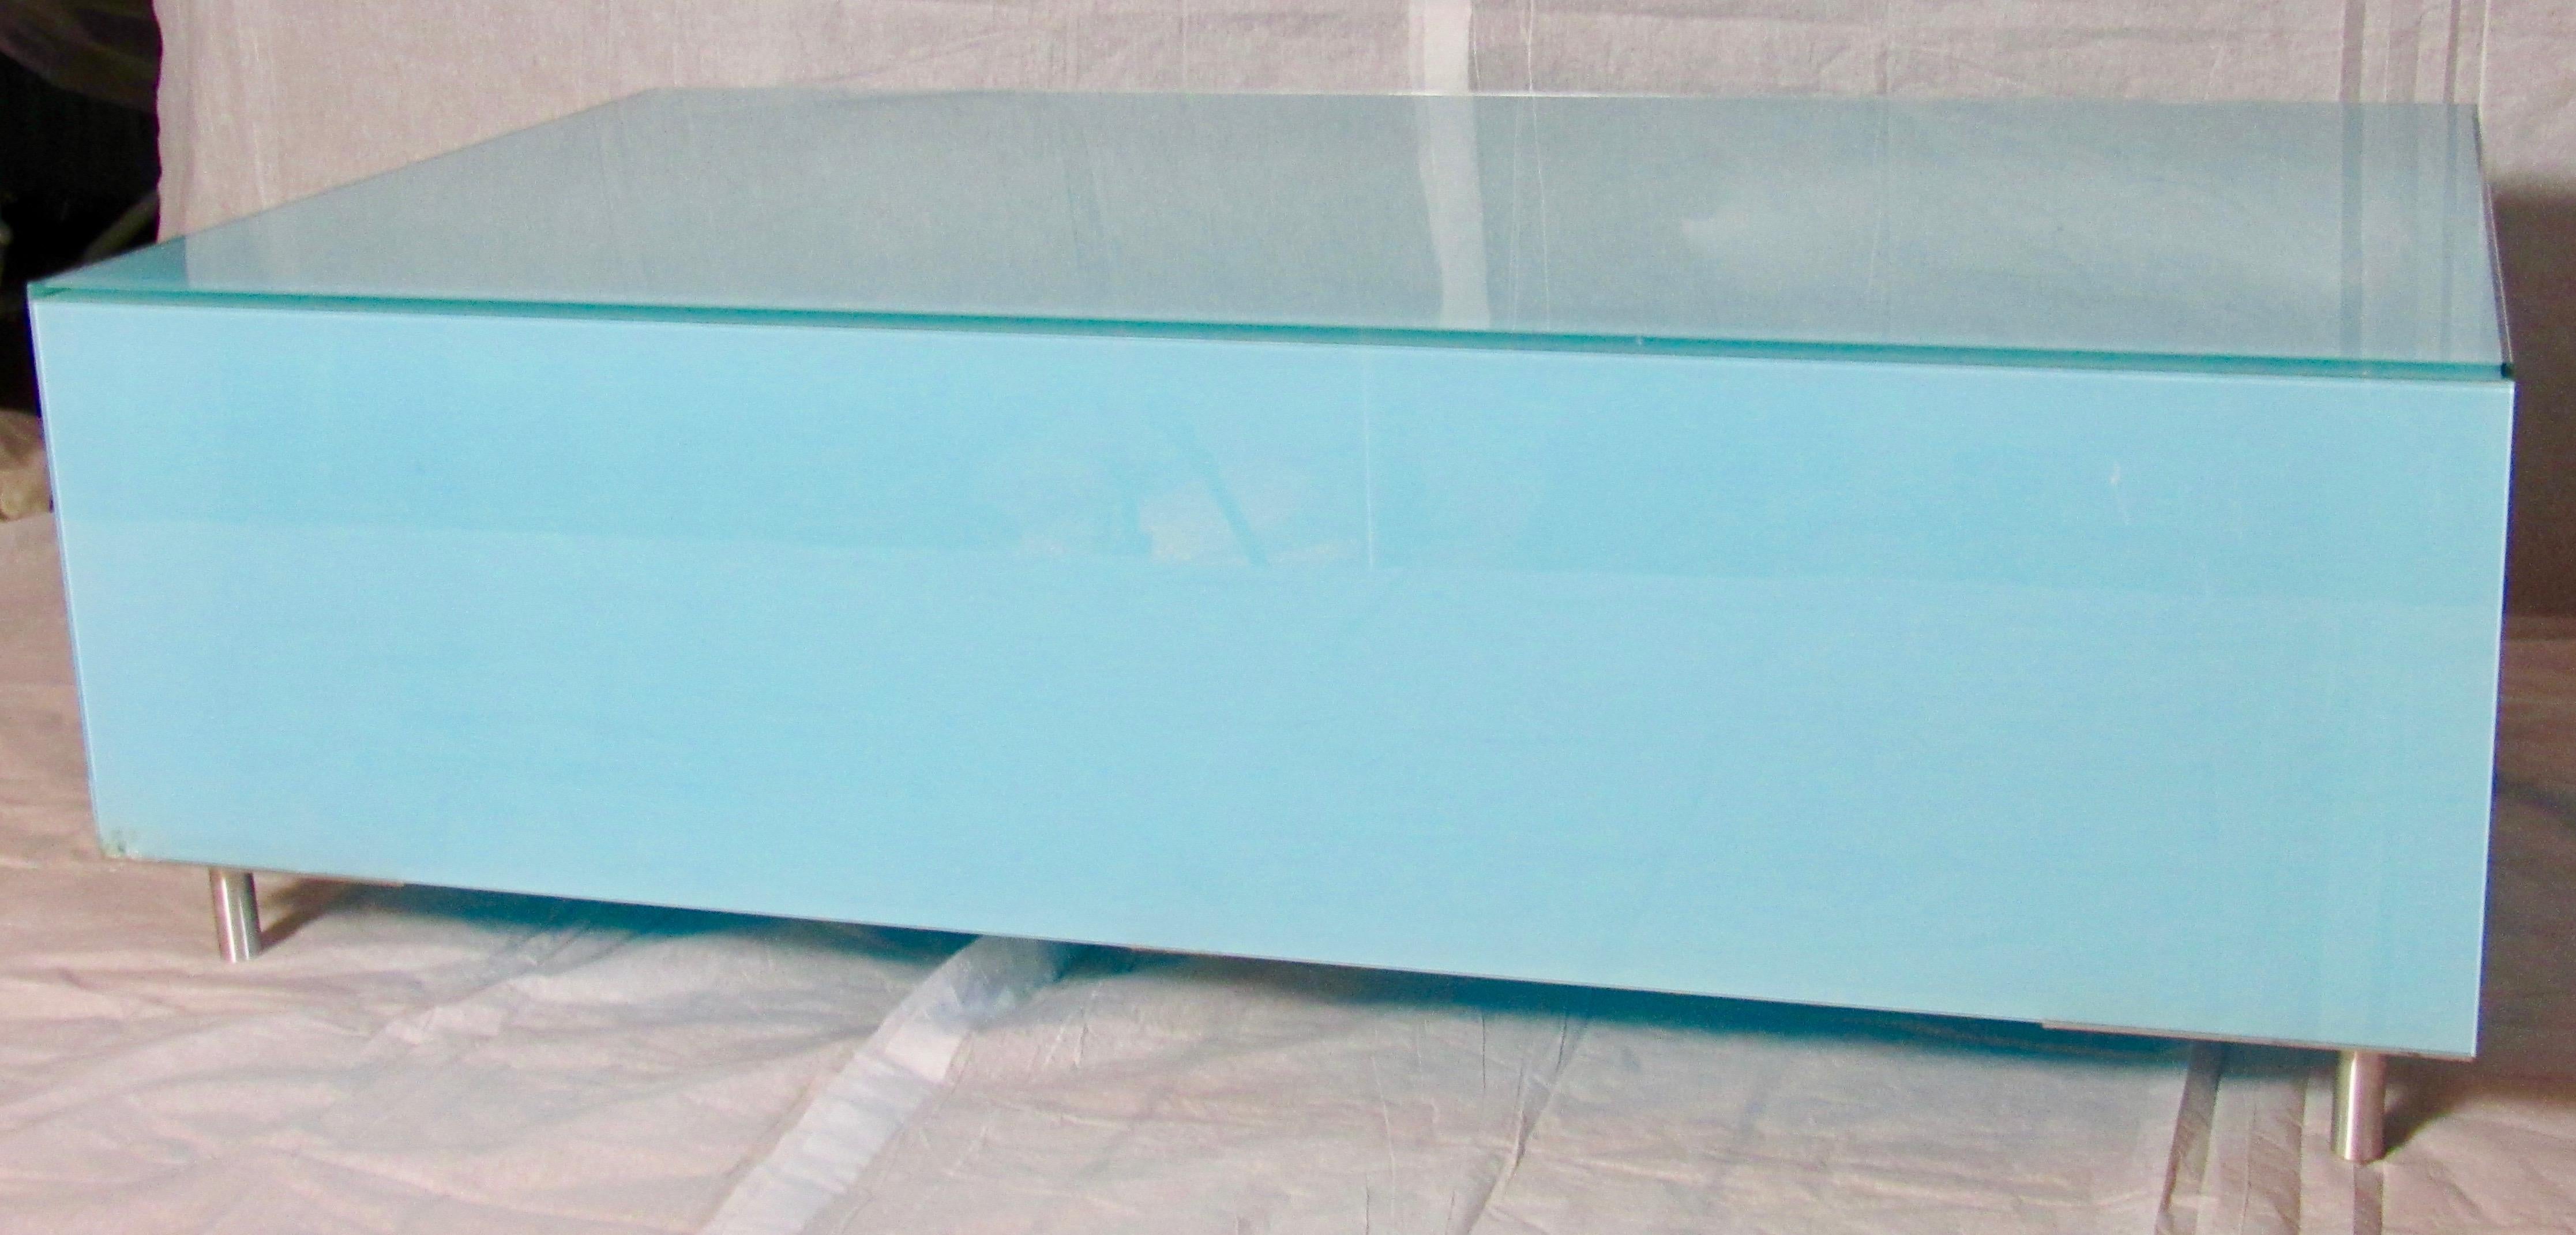 A glass rectangle coffee table in Robin's Egg Blue.
An unusual Minimalist Italian design of reverse painted glass, circa 1970.
Finely crafted glass panels rest on stainless steel feet with aluminum triangles in each corner and a single mid-point